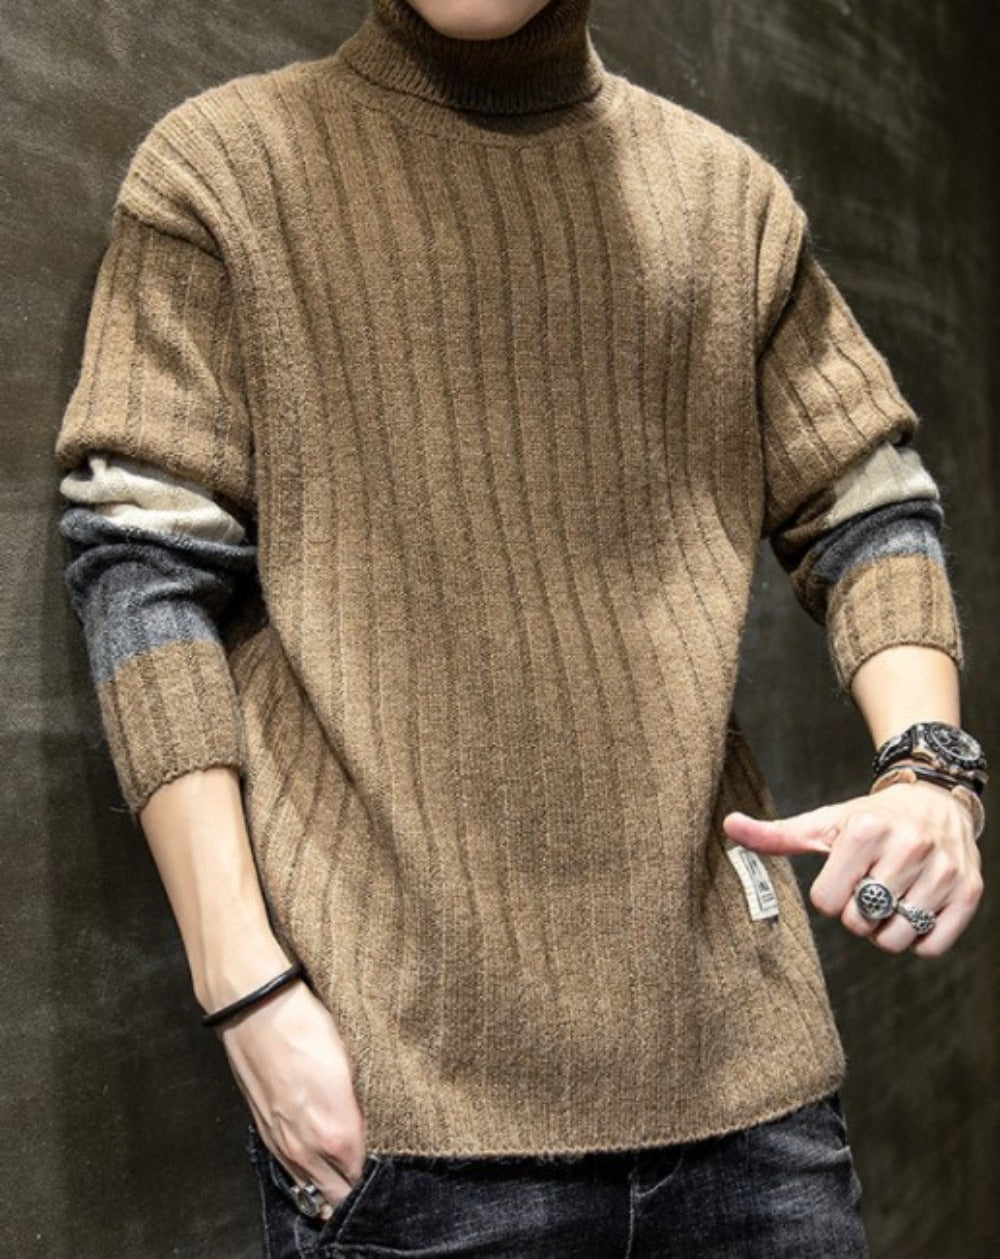 Mens Causal Turtle Neck Sweater with Stripe Sleeves Design